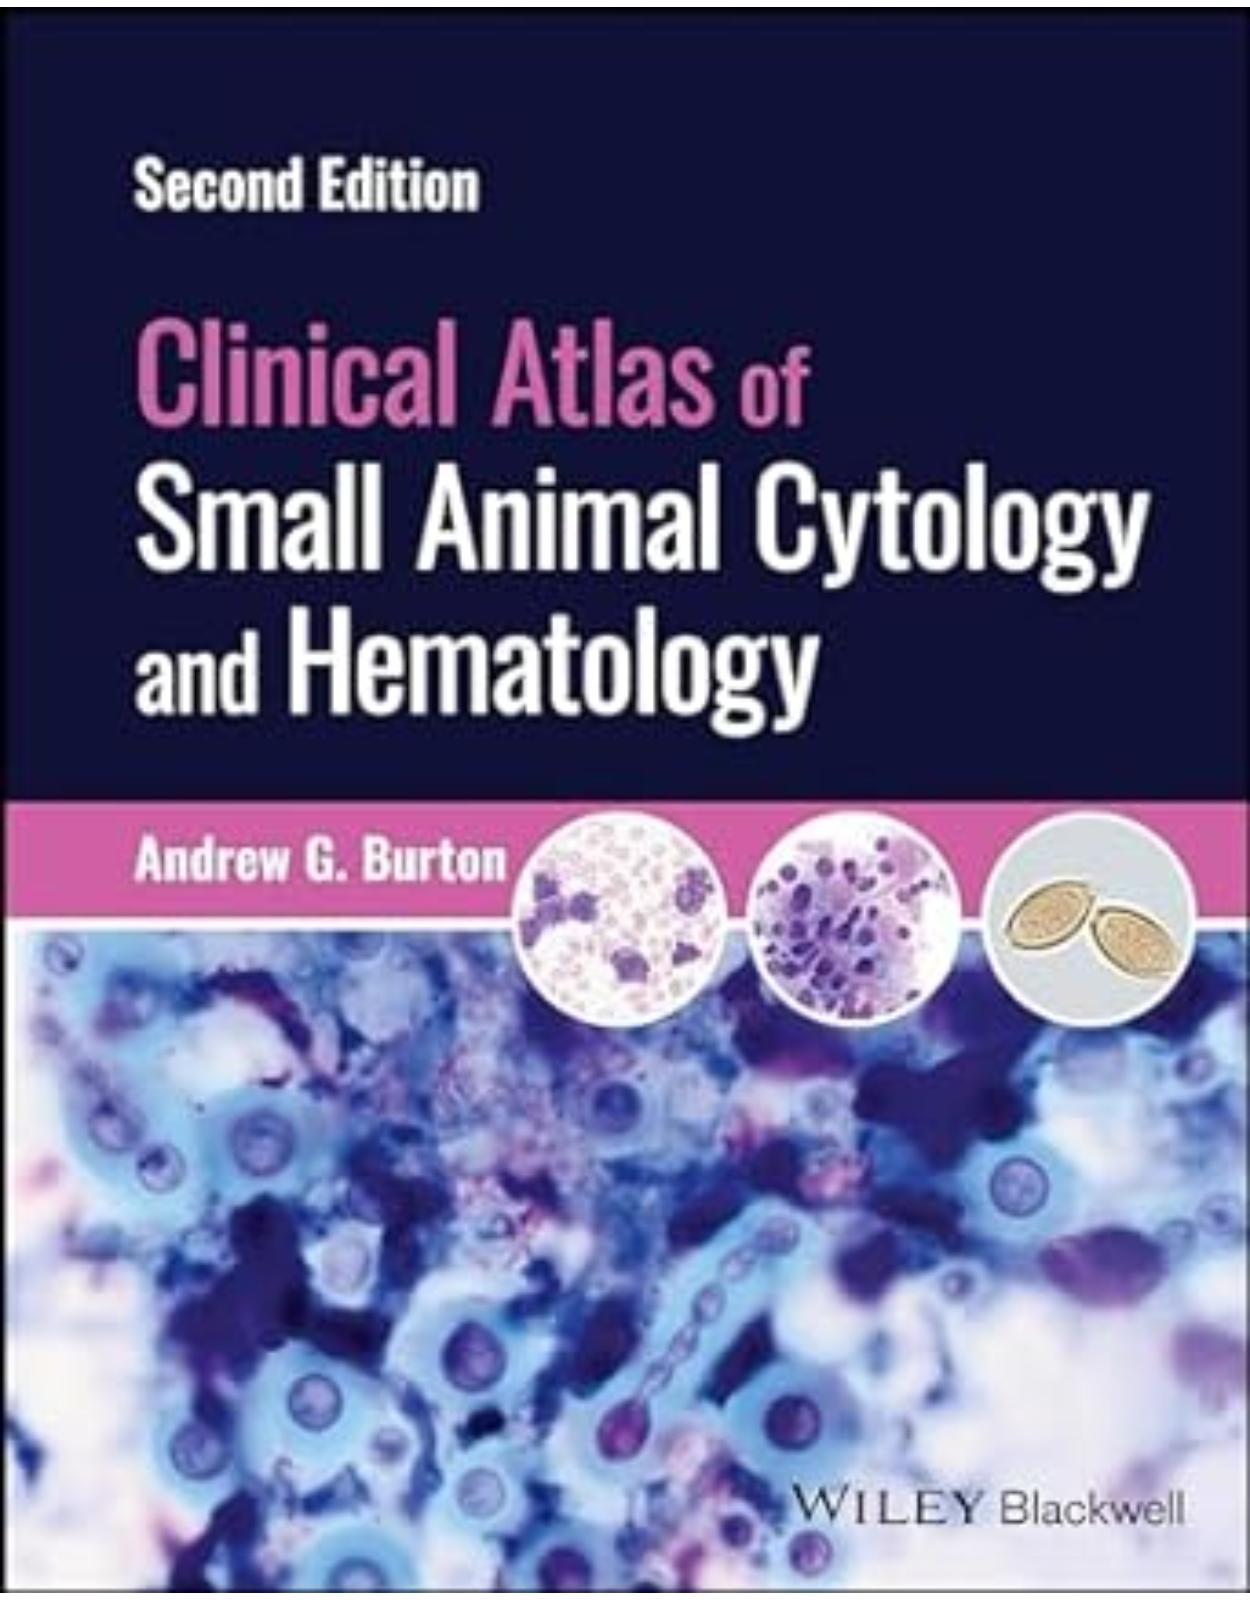 Clinical Atlas of Small Animal Cytology and Hematology 2nd Edition